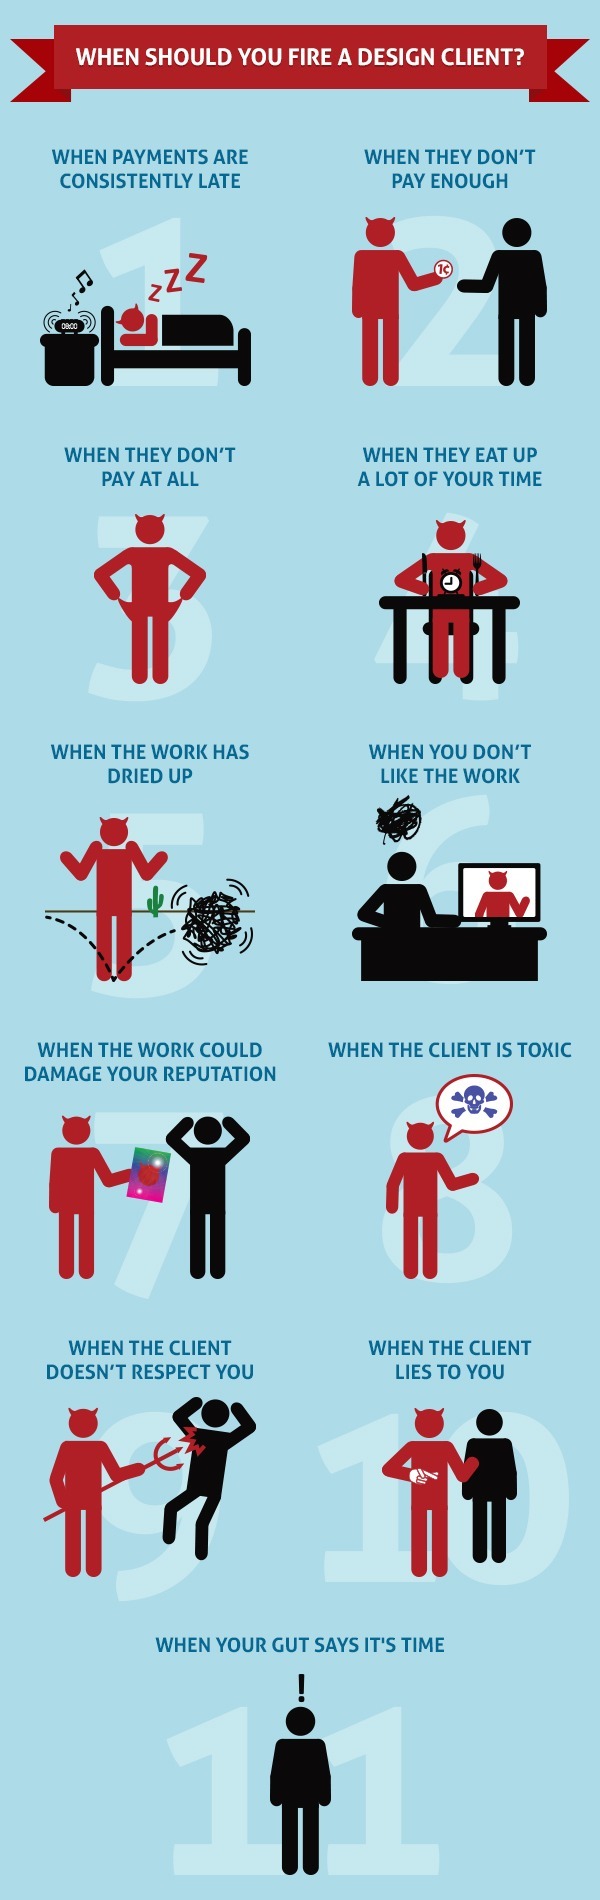 firing-clients-infographic